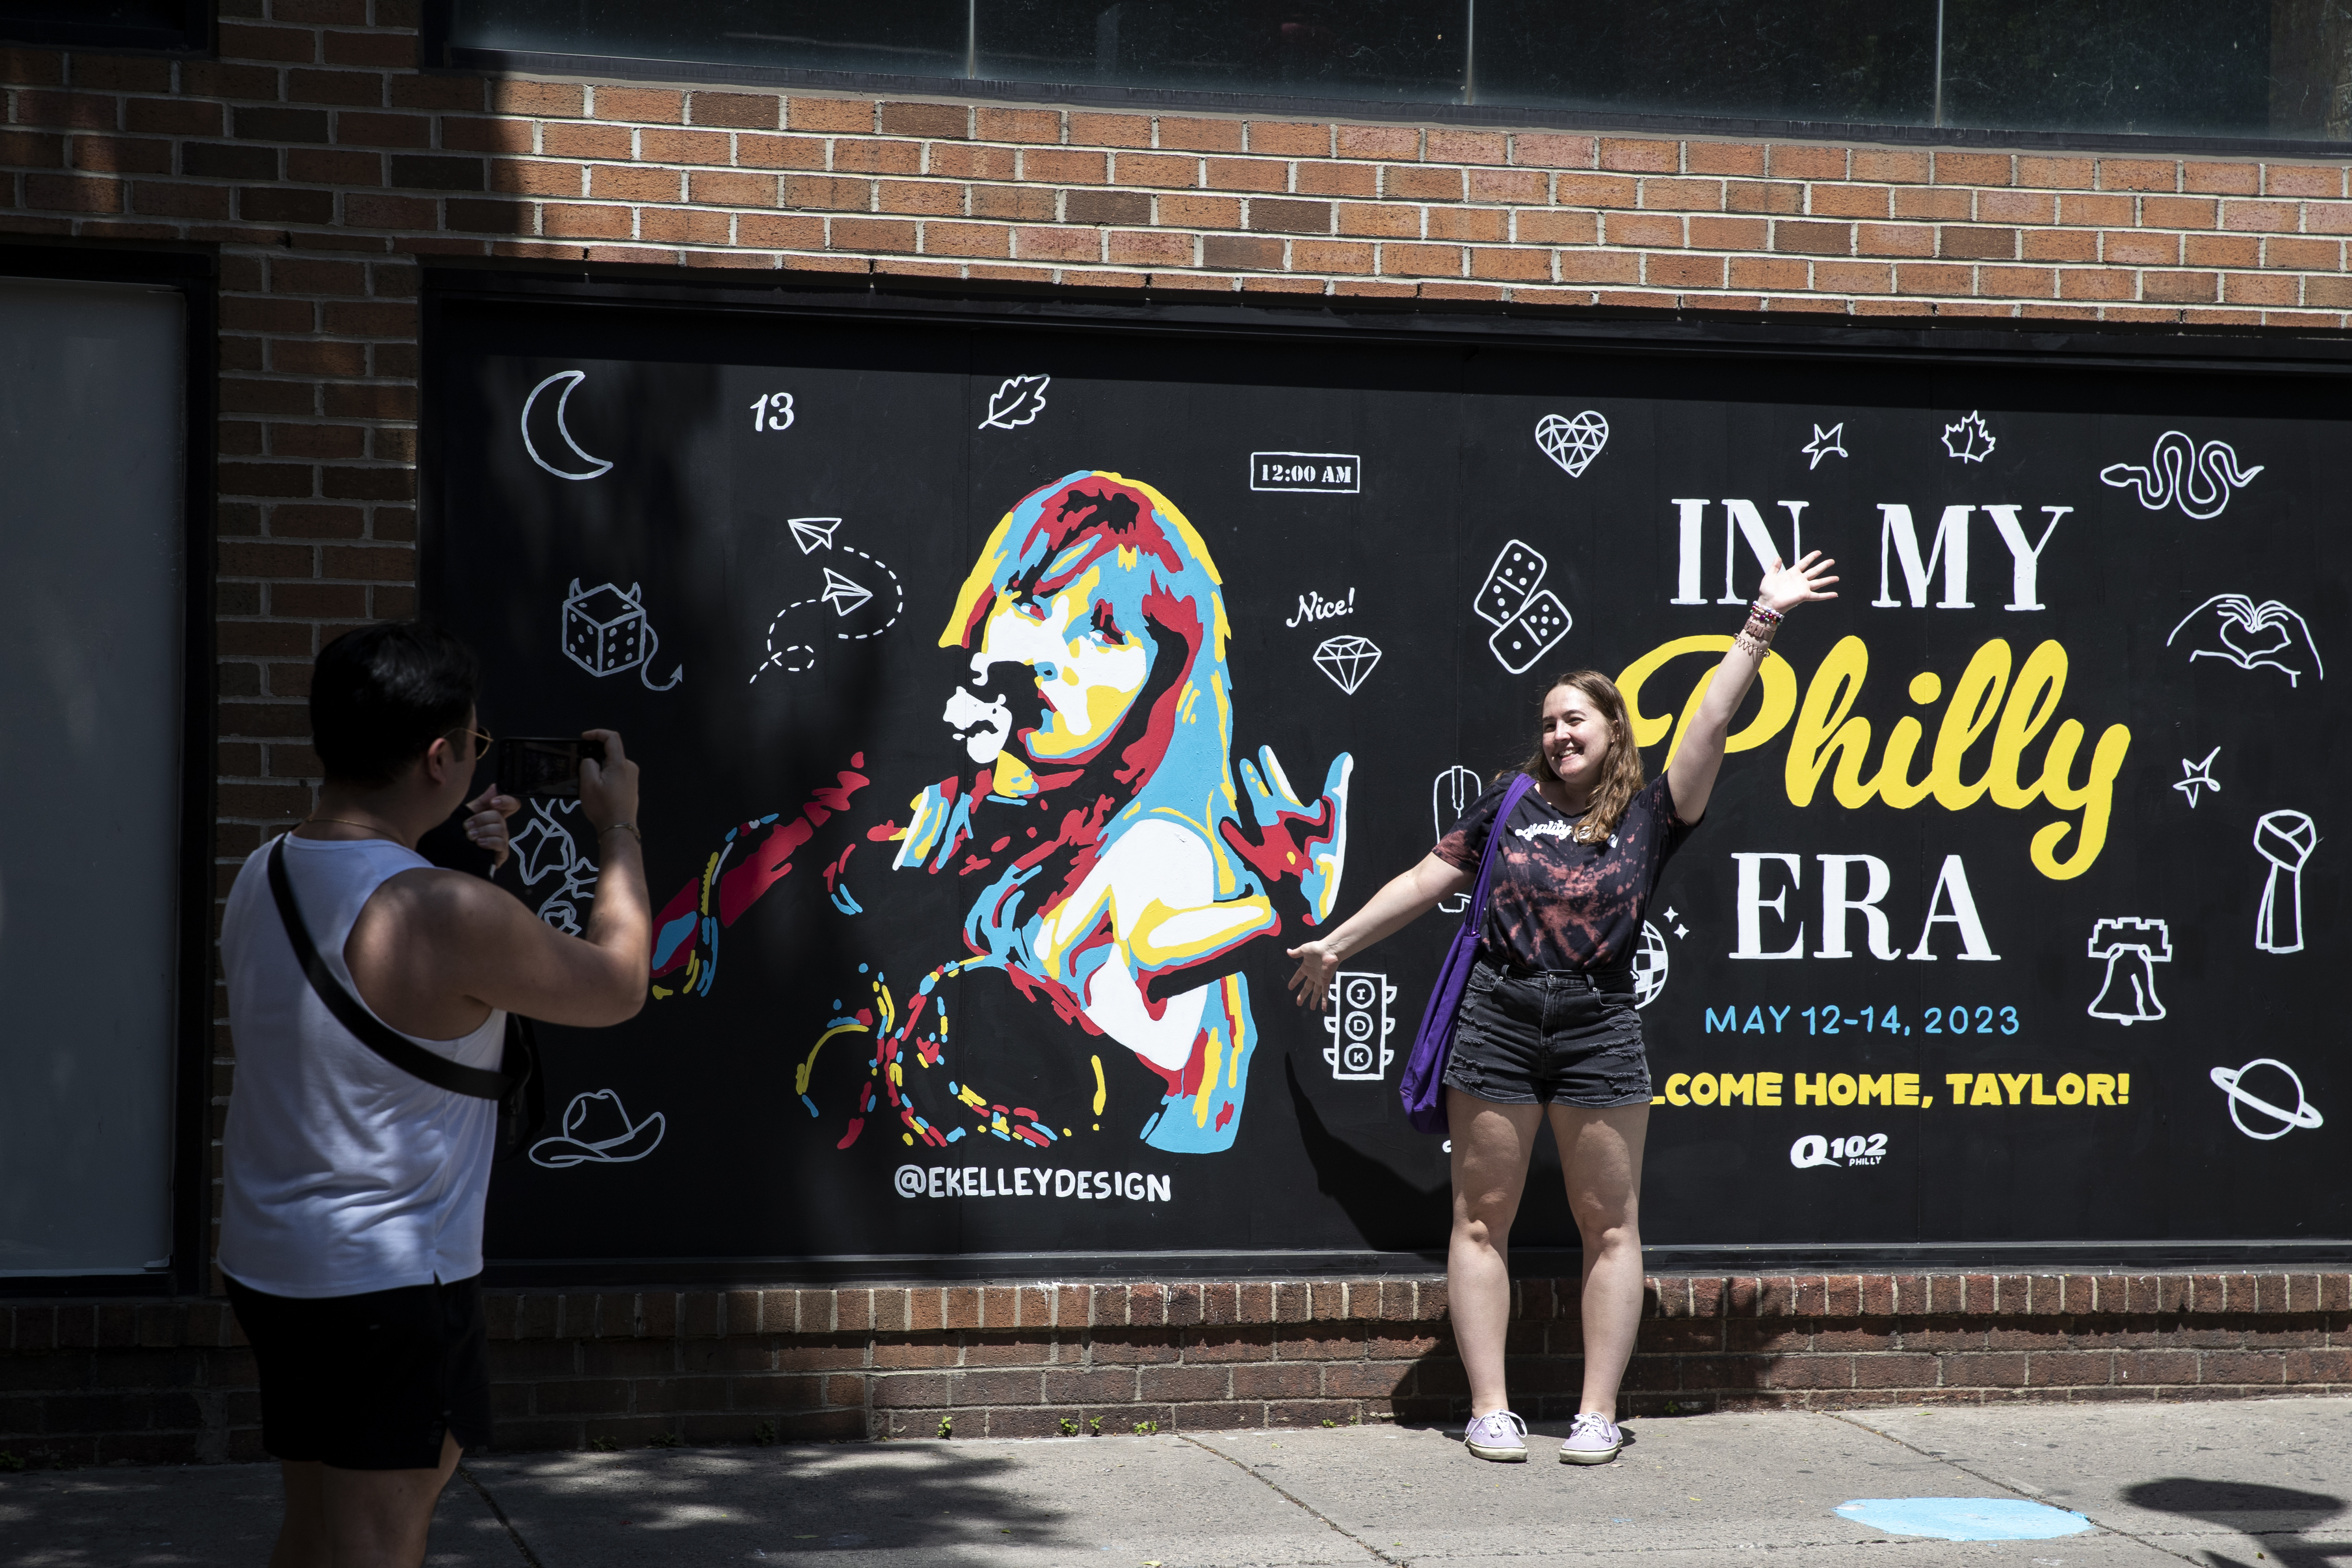 The road to Taylor Swift's “The Eras Tour” in Philadelphia